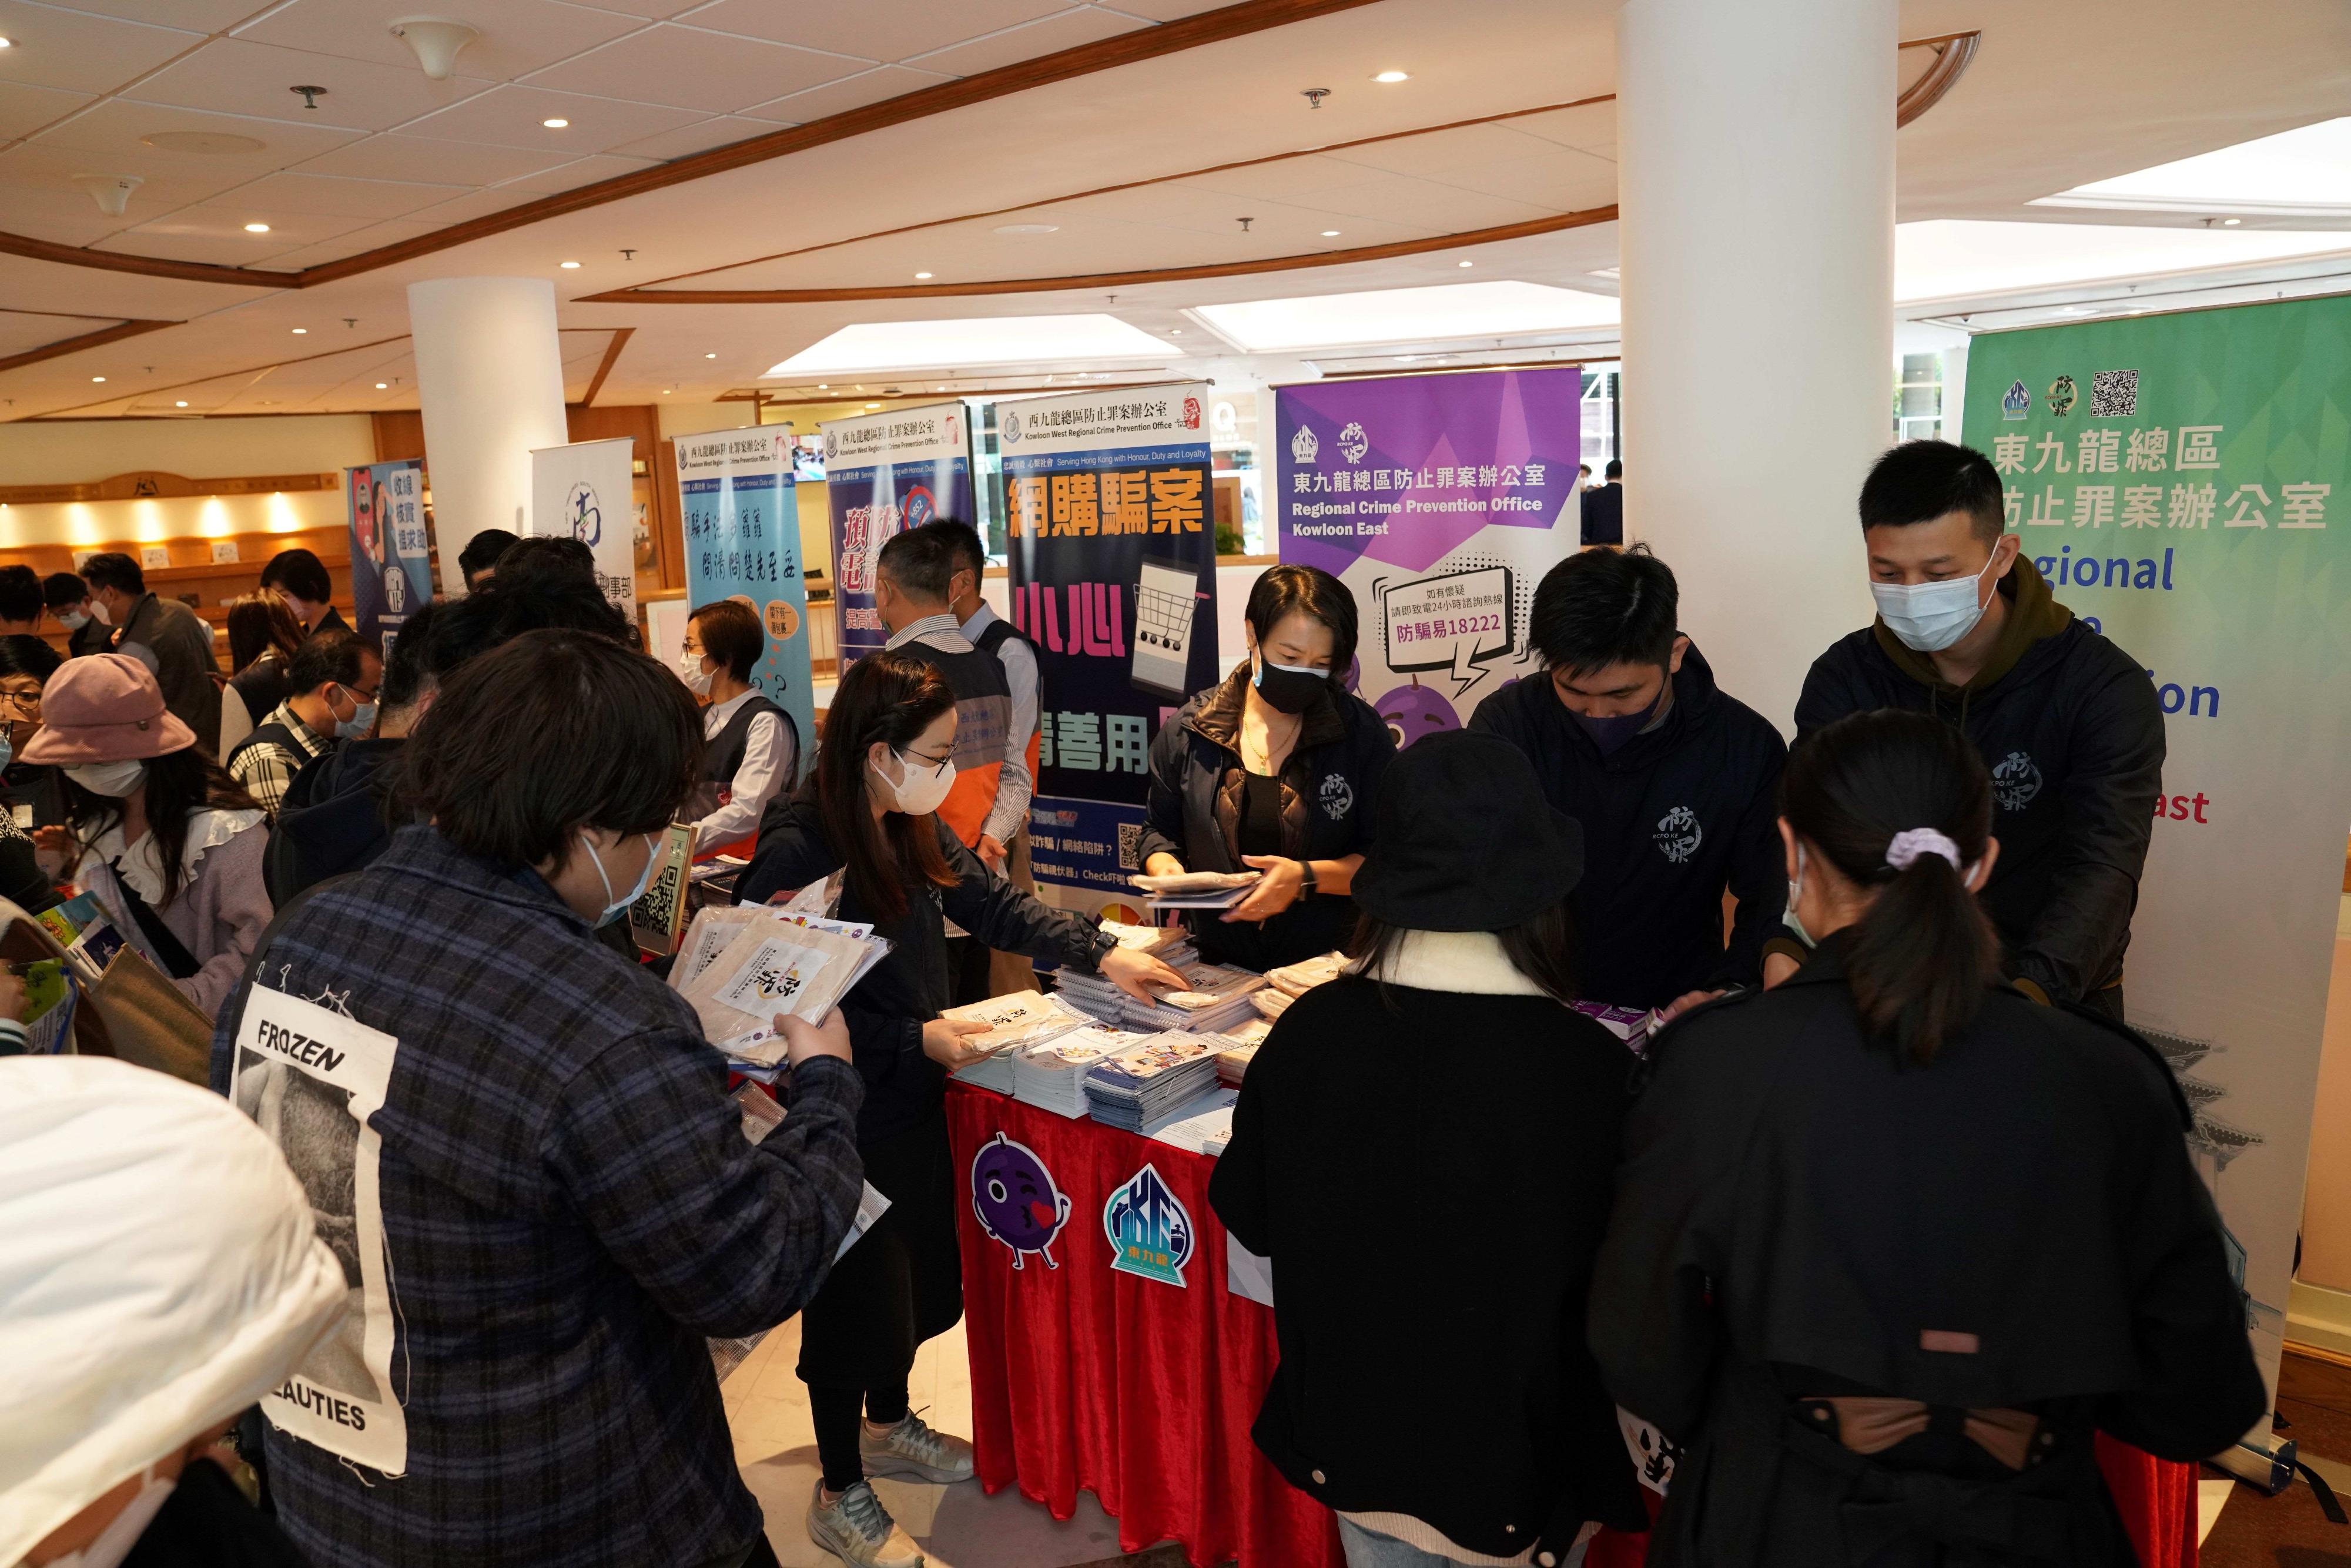 Police officers distributing publicity materials to Mainland tertiary students studying in Hong Kong after the 'Beware of Scams! Join Us to Combat Deceptions' anti-deception seminar today (February 25).